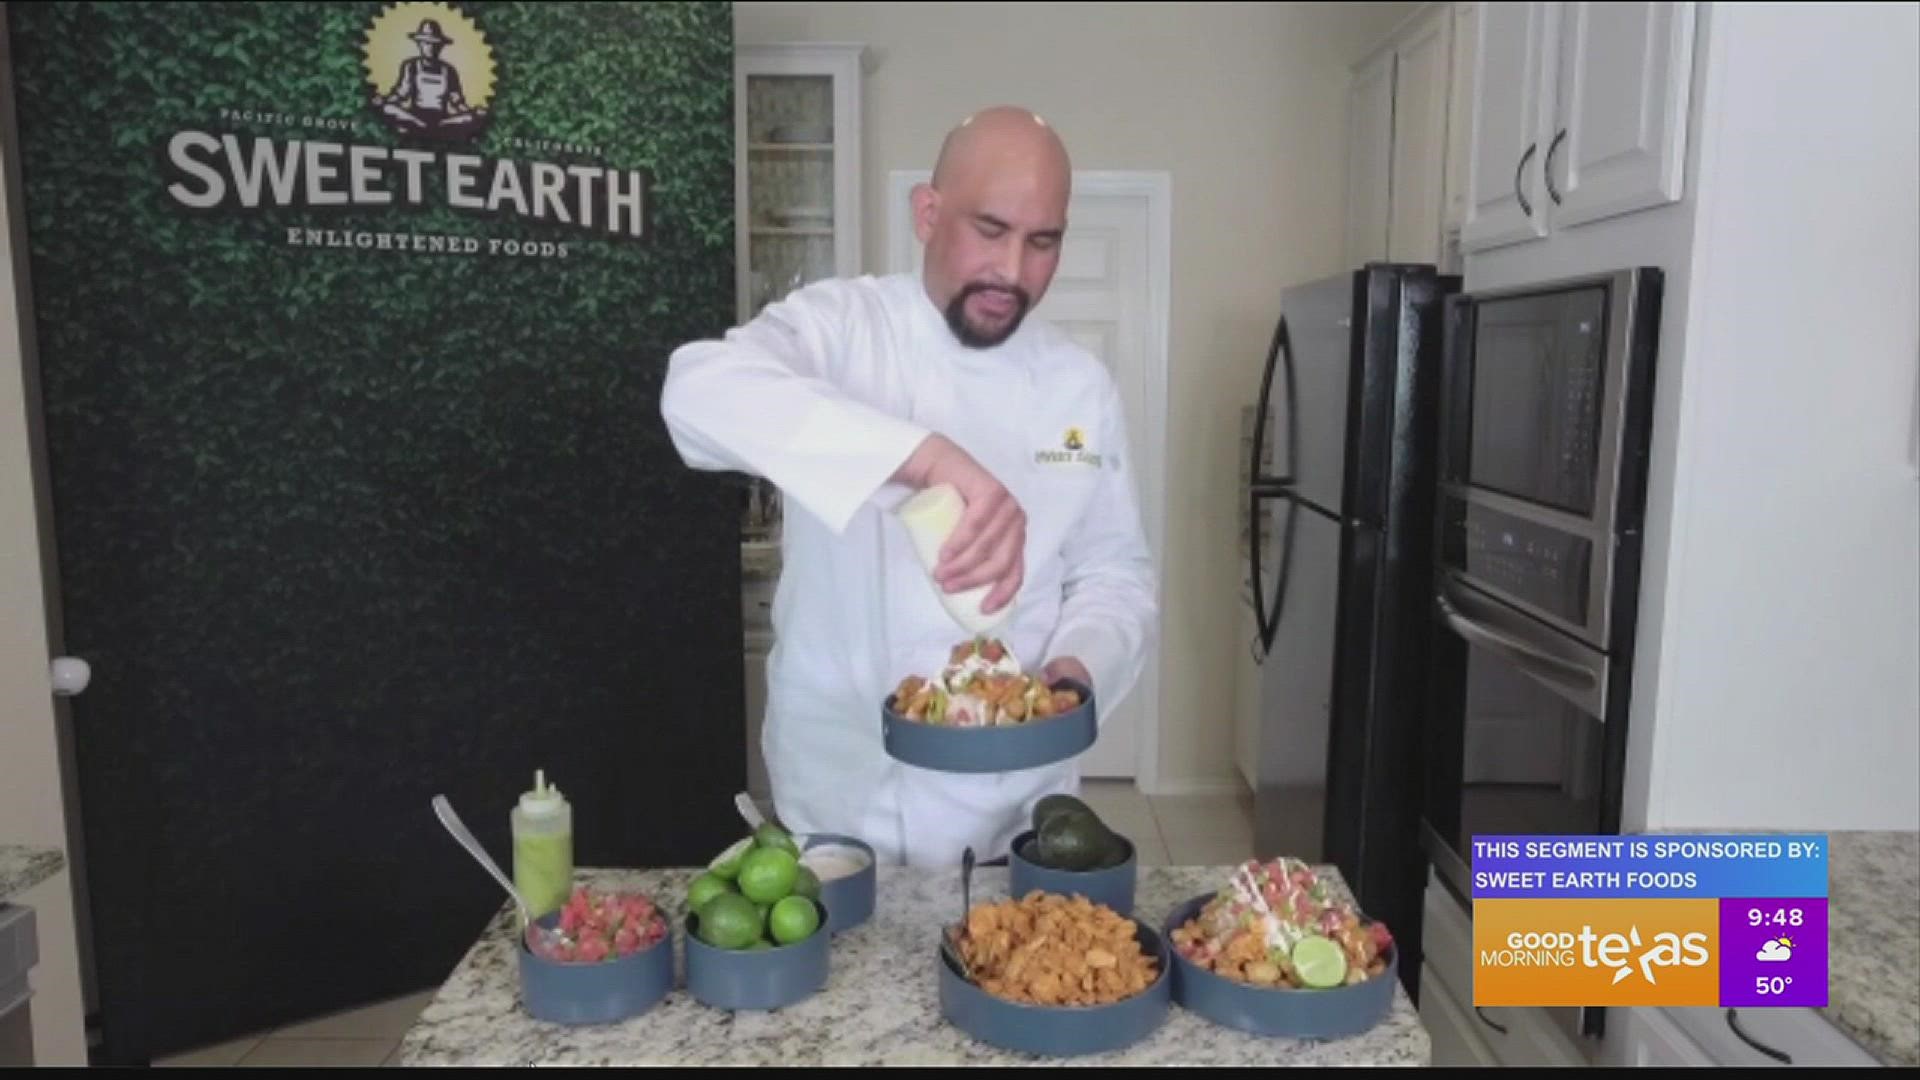 This segment is sponsored by: Sweet Earth Foods